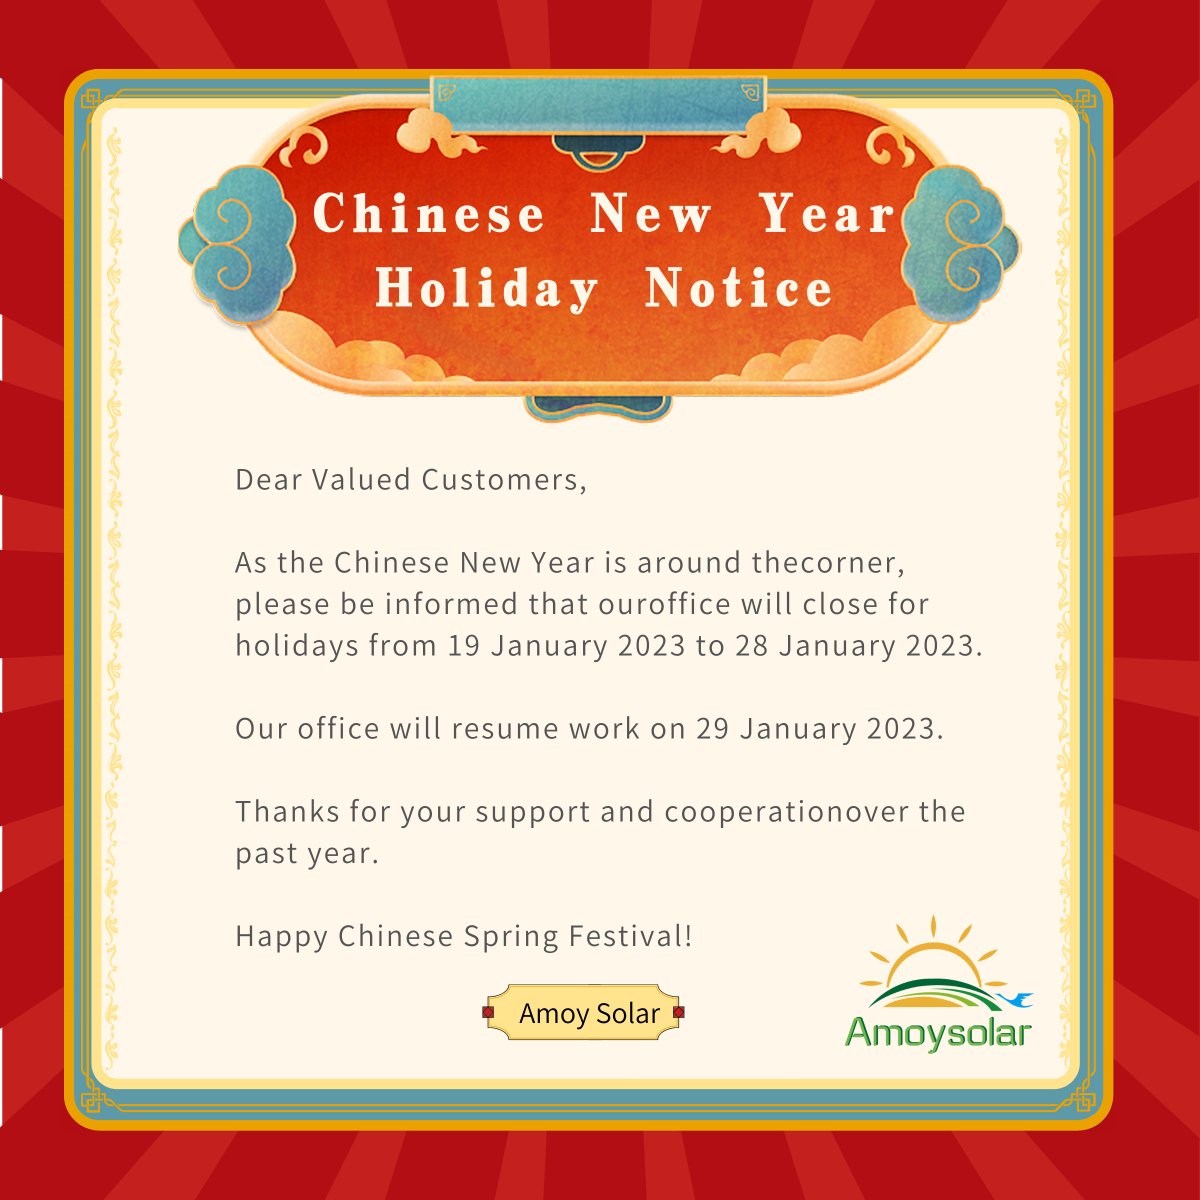 Dear Valued Customers,
As the Chinese New Year is around thecorner,please be informed that ouroffice will close forholidays from 19 January 2023 to 28 January 2023
Our office will resume work on 29 January 2023.
Thanks for your support and cooperationover thepast year.